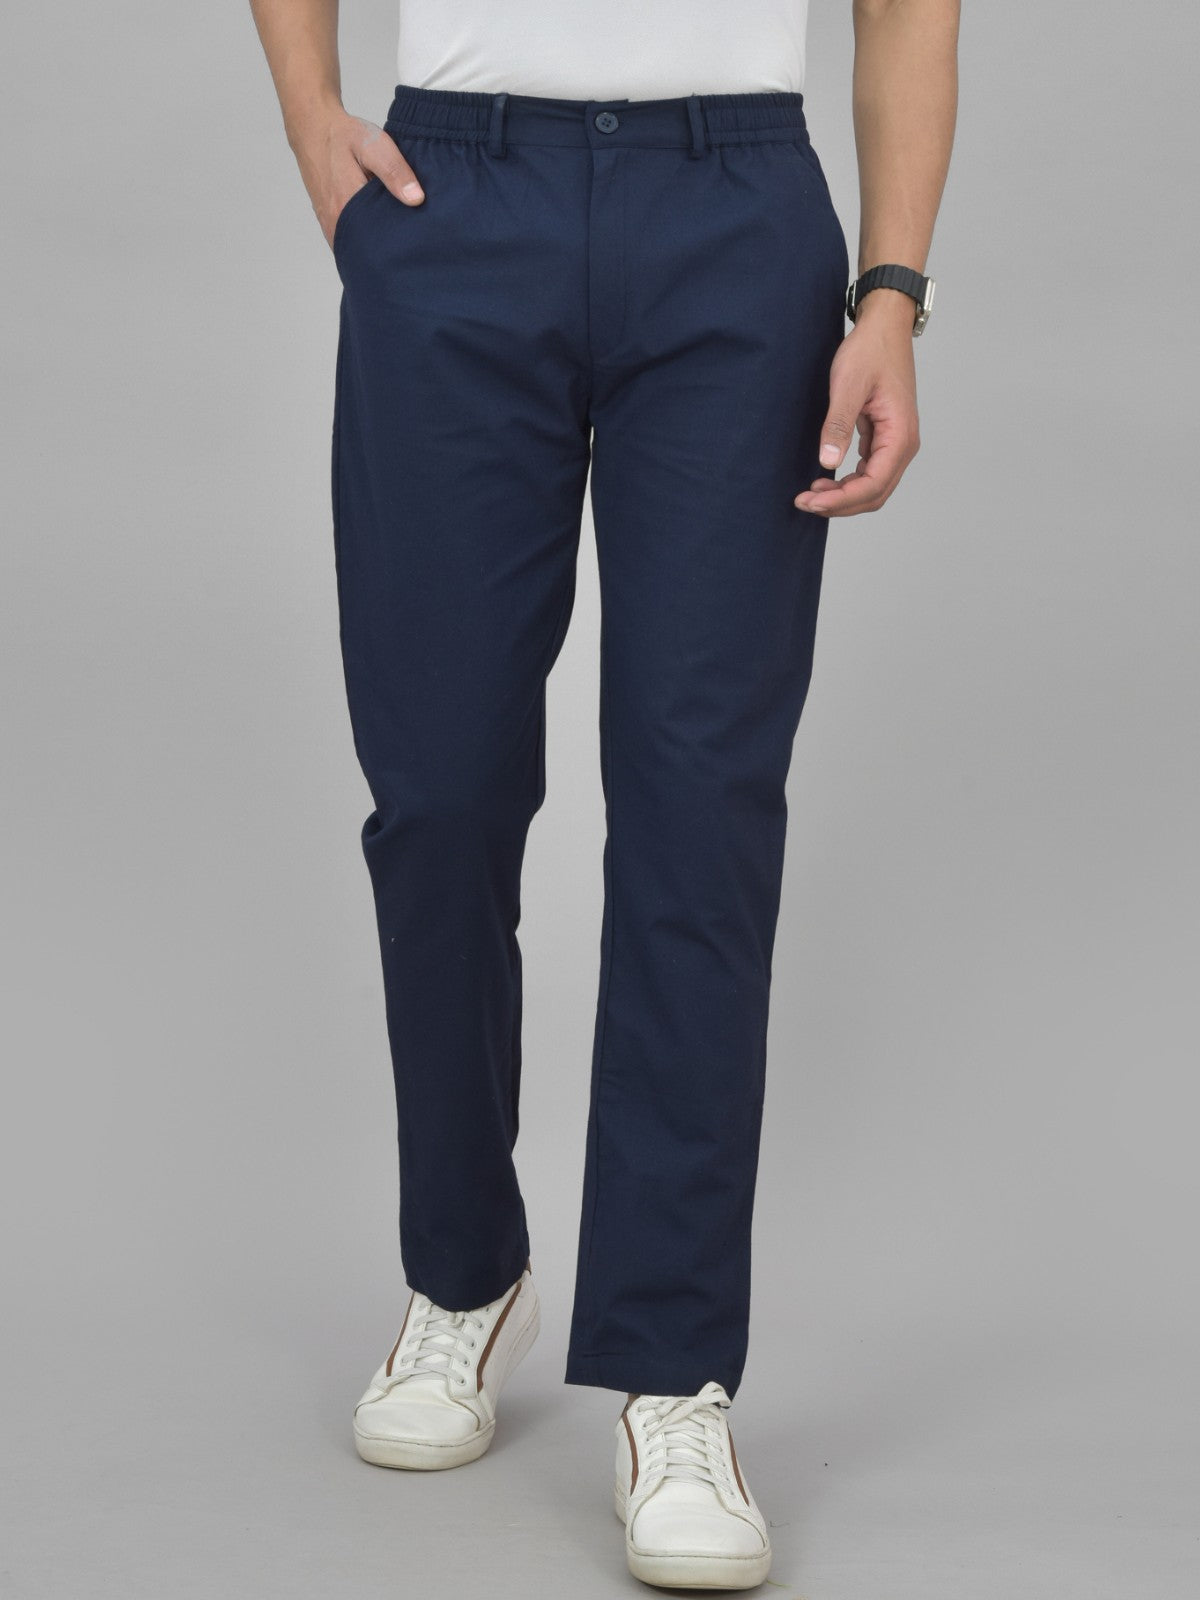 Combo Pack Of Mens Black And Navy Blue Regualr Fit Cotton Trousers